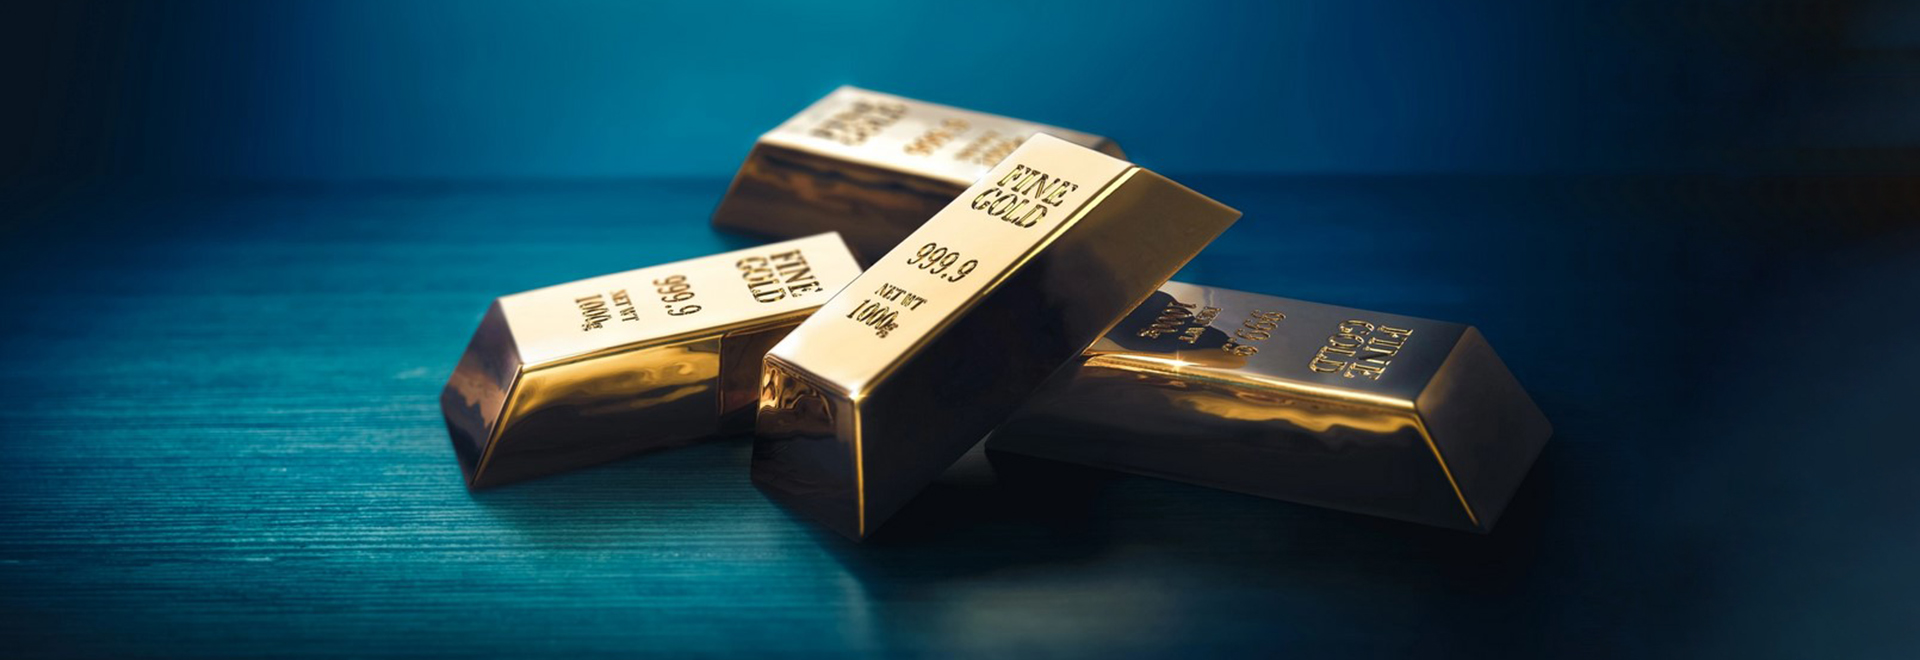 Experts Predict Gold Price Dip Ahead of US Fed Meeting